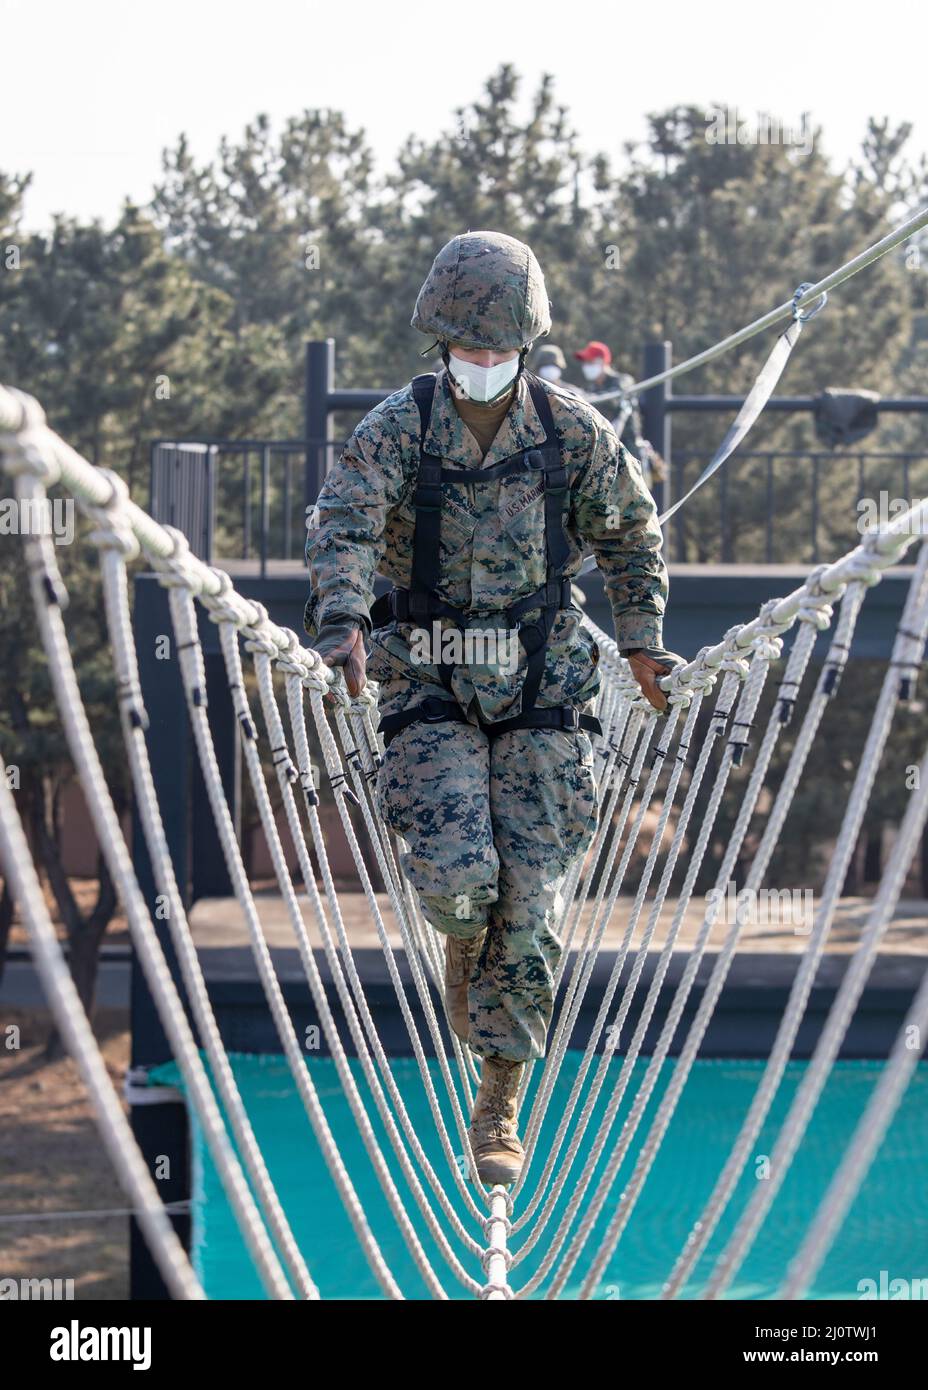 U.S. Marine Corps Lance Cpl. Parker Wicks, a Marine Air Ground Taskforce planner with U.S. Marine Corps Forces Korea, crosses a rope bridge during a ropes course with 3D Sustainment Group (Experimental), 3D Marine Logistics Group and Republic of Korea Marine Corps Ranger School in Pohang, South Korea, Jan. 27, 2022. The course increased the Marines’ readiness with rappelling and rope work while improving interoperability with our partners and allies. (U.S. Marine Corps photo by Sgt. Ash McLaughlin) Stock Photo